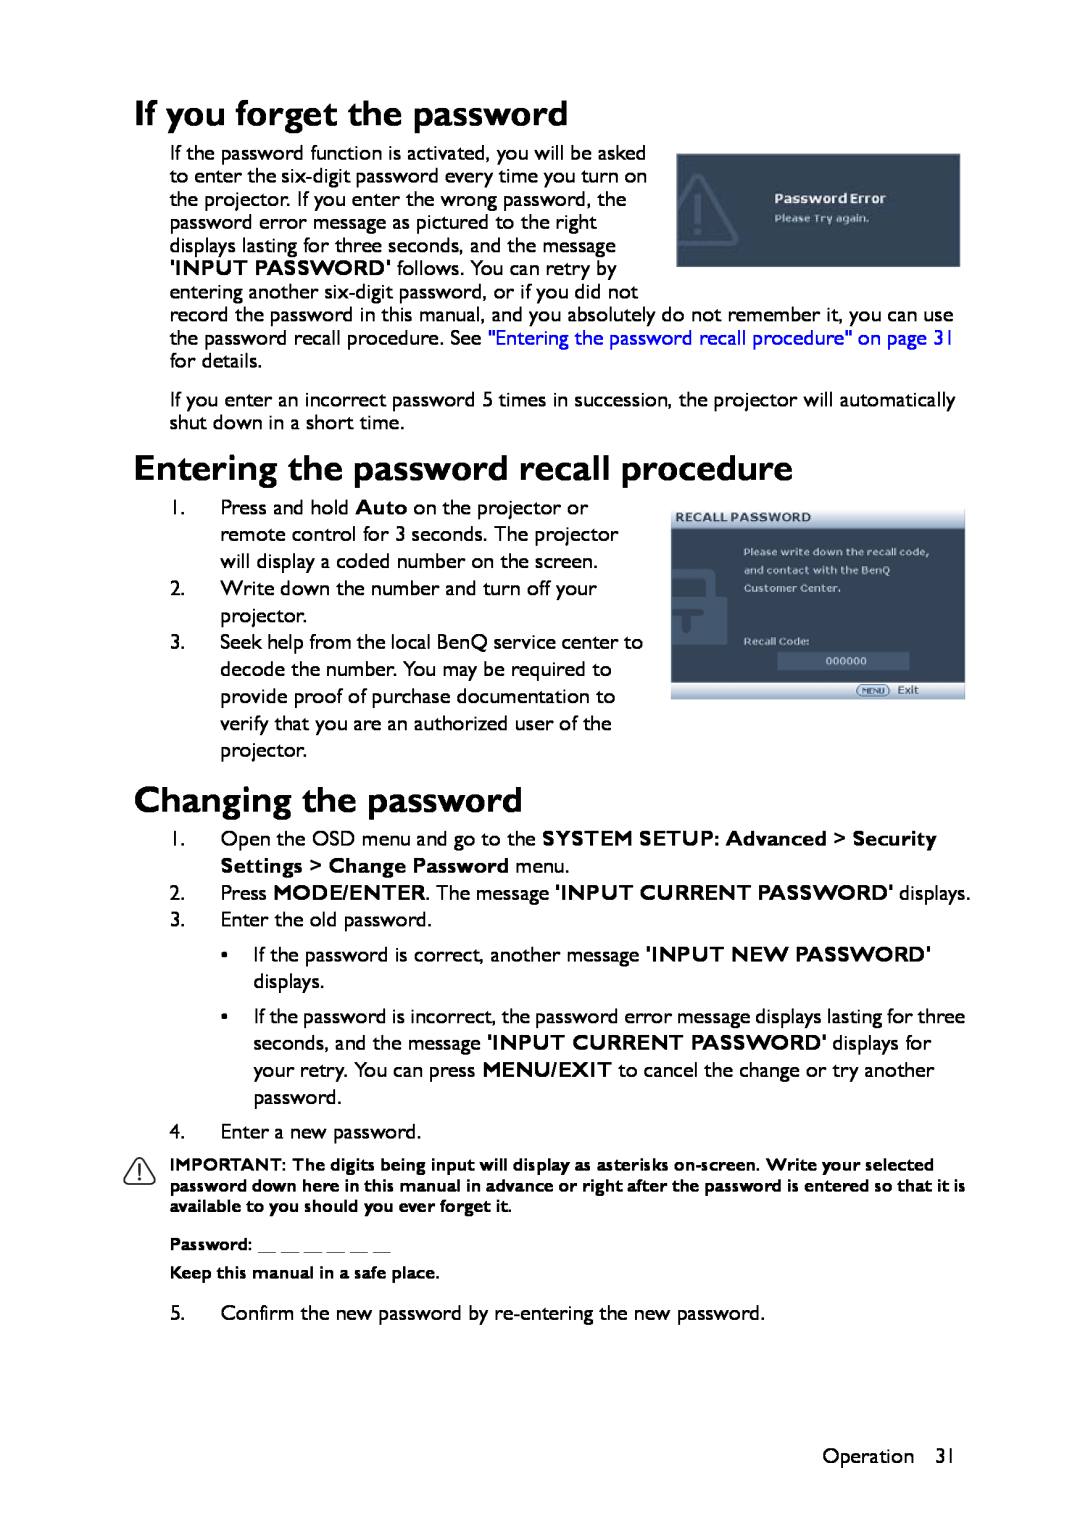 BenQ MX661 user manual If you forget the password, Entering the password recall procedure, Changing the password 